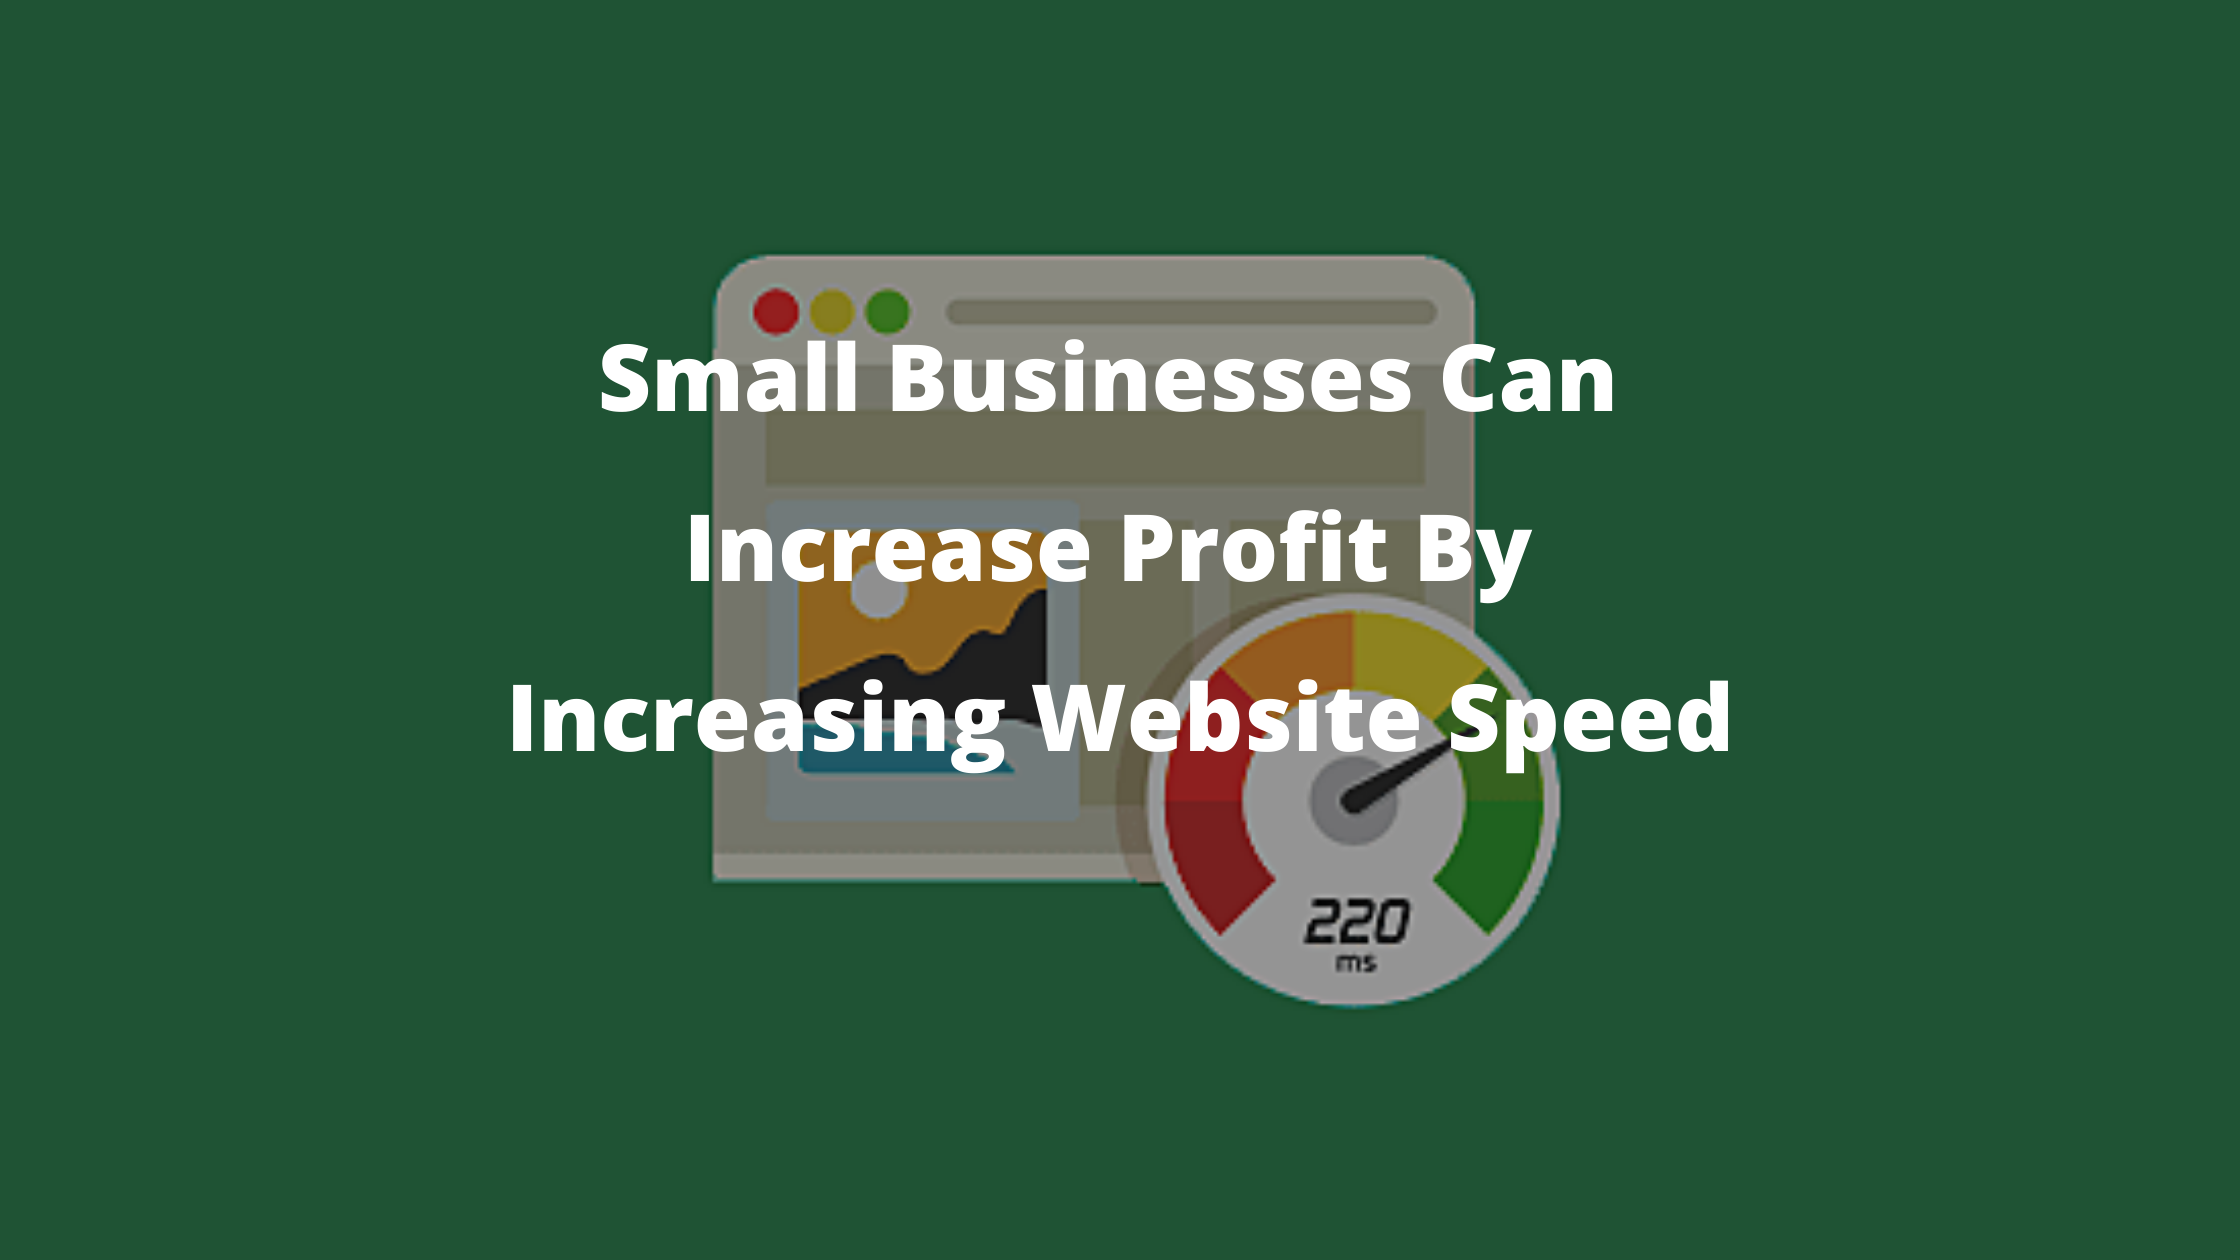 Small Businesses Can Increase Profit By Increasing Website Speed